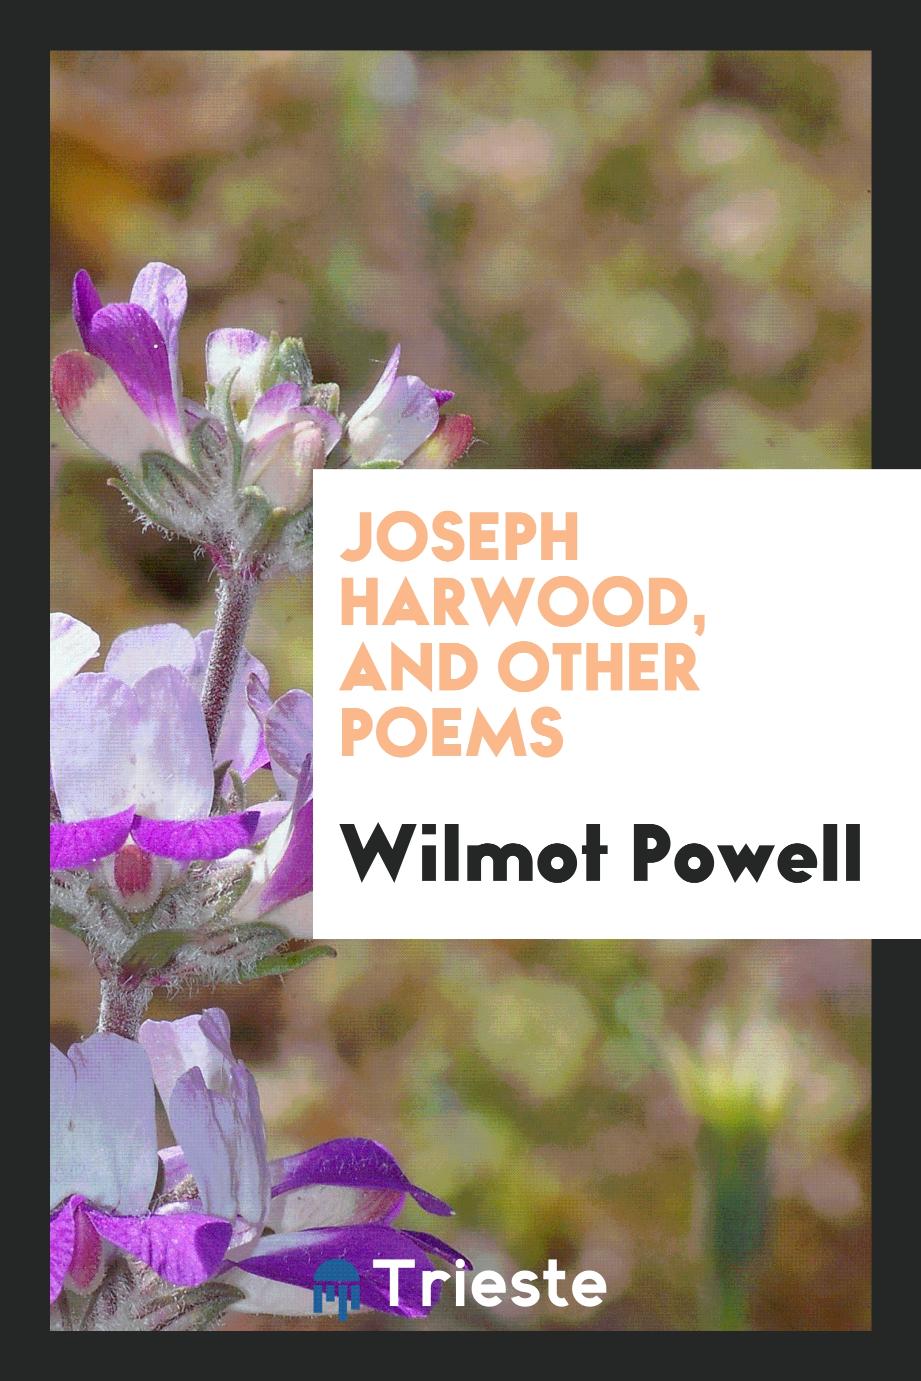 Joseph Harwood, and other poems